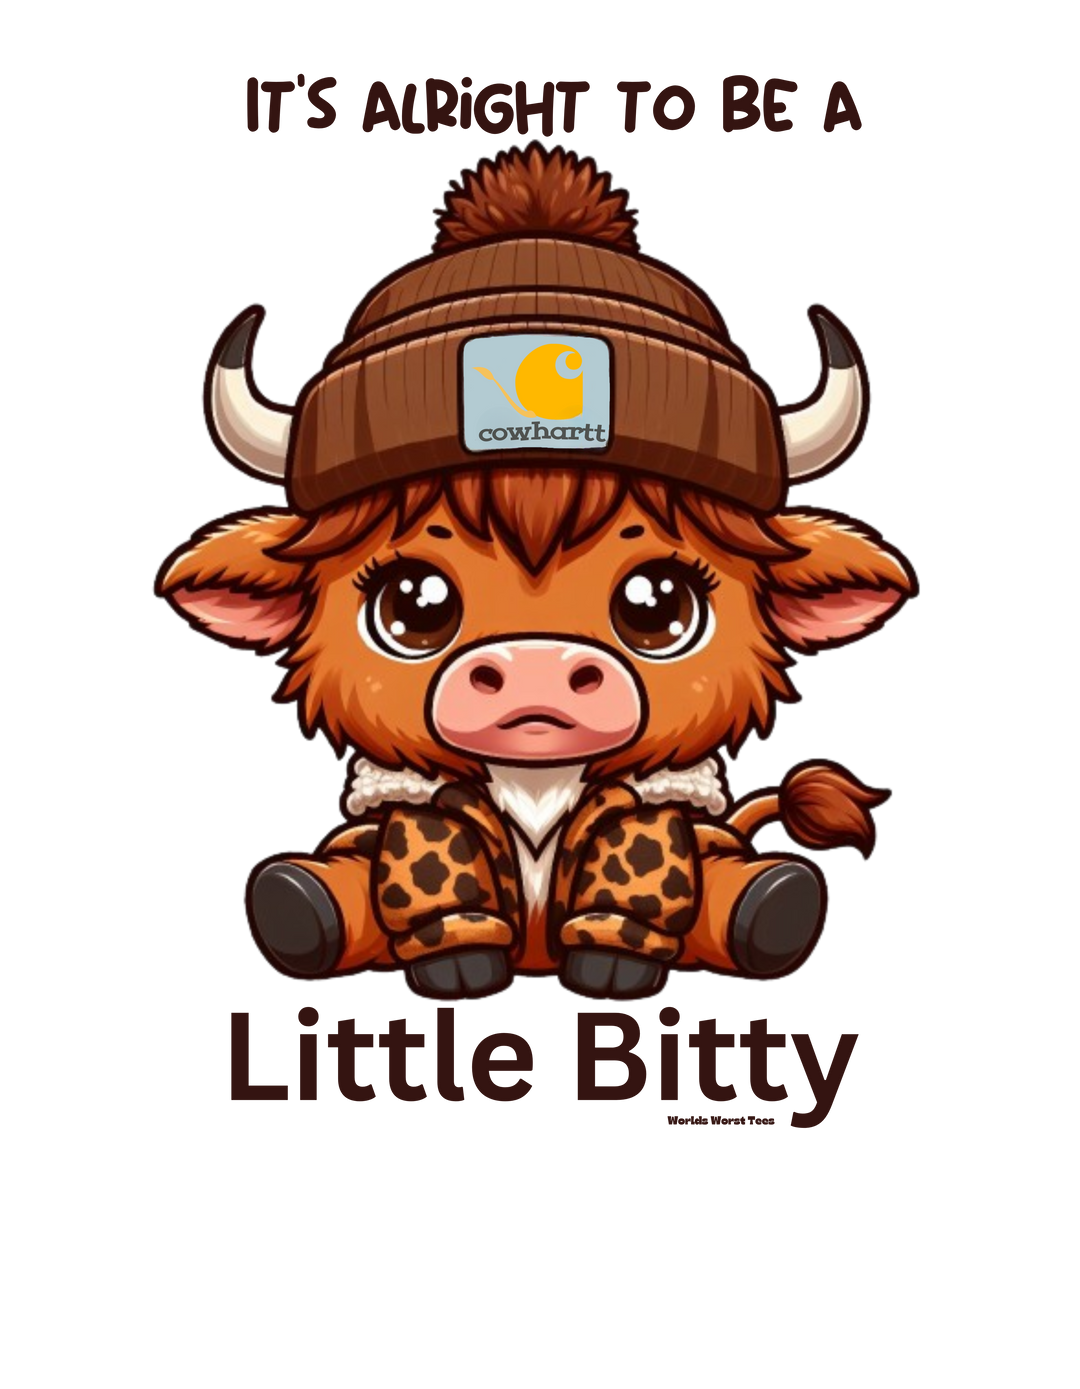 A Little Bitty Toddler Tee featuring a cartoon cow with a hat, perfect for sensitive skin. 100% combed ringspun cotton, light fabric, tear-away label, classic fit. Sizes: 2T, 3T, 4T, 5-6T.